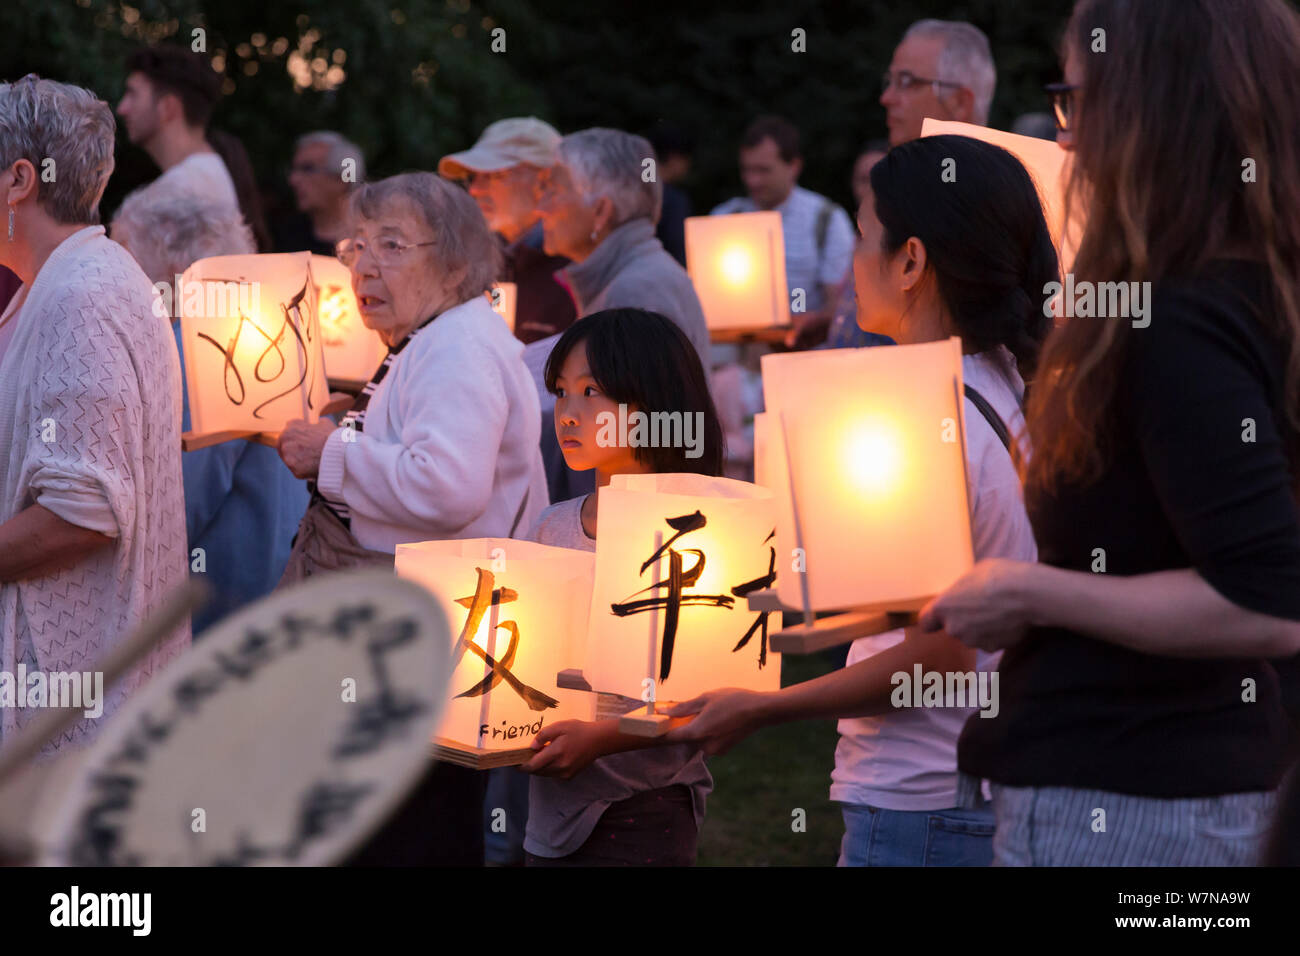 Participants gather with paper lanterns at the Toro Nagashi Lantern Floating Ceremony in Seattle, Washington on August 6, 2019. “From Hiroshima To Hope” is held in remembrance of atomic bomb victims on the anniversary of the bombing of Hiroshima, Japan. The ceremony, organized by a collation of peace, religious, civil liberties and cultural heritage organizations, honors victims of the bombings of Hiroshima and Nagasaki, and all victims of violence. It is an adaptation of an ancient Japanese Buddhist ritual, the Toro Nagashi, in which lanterns representing the souls of the dead are floated out Stock Photo